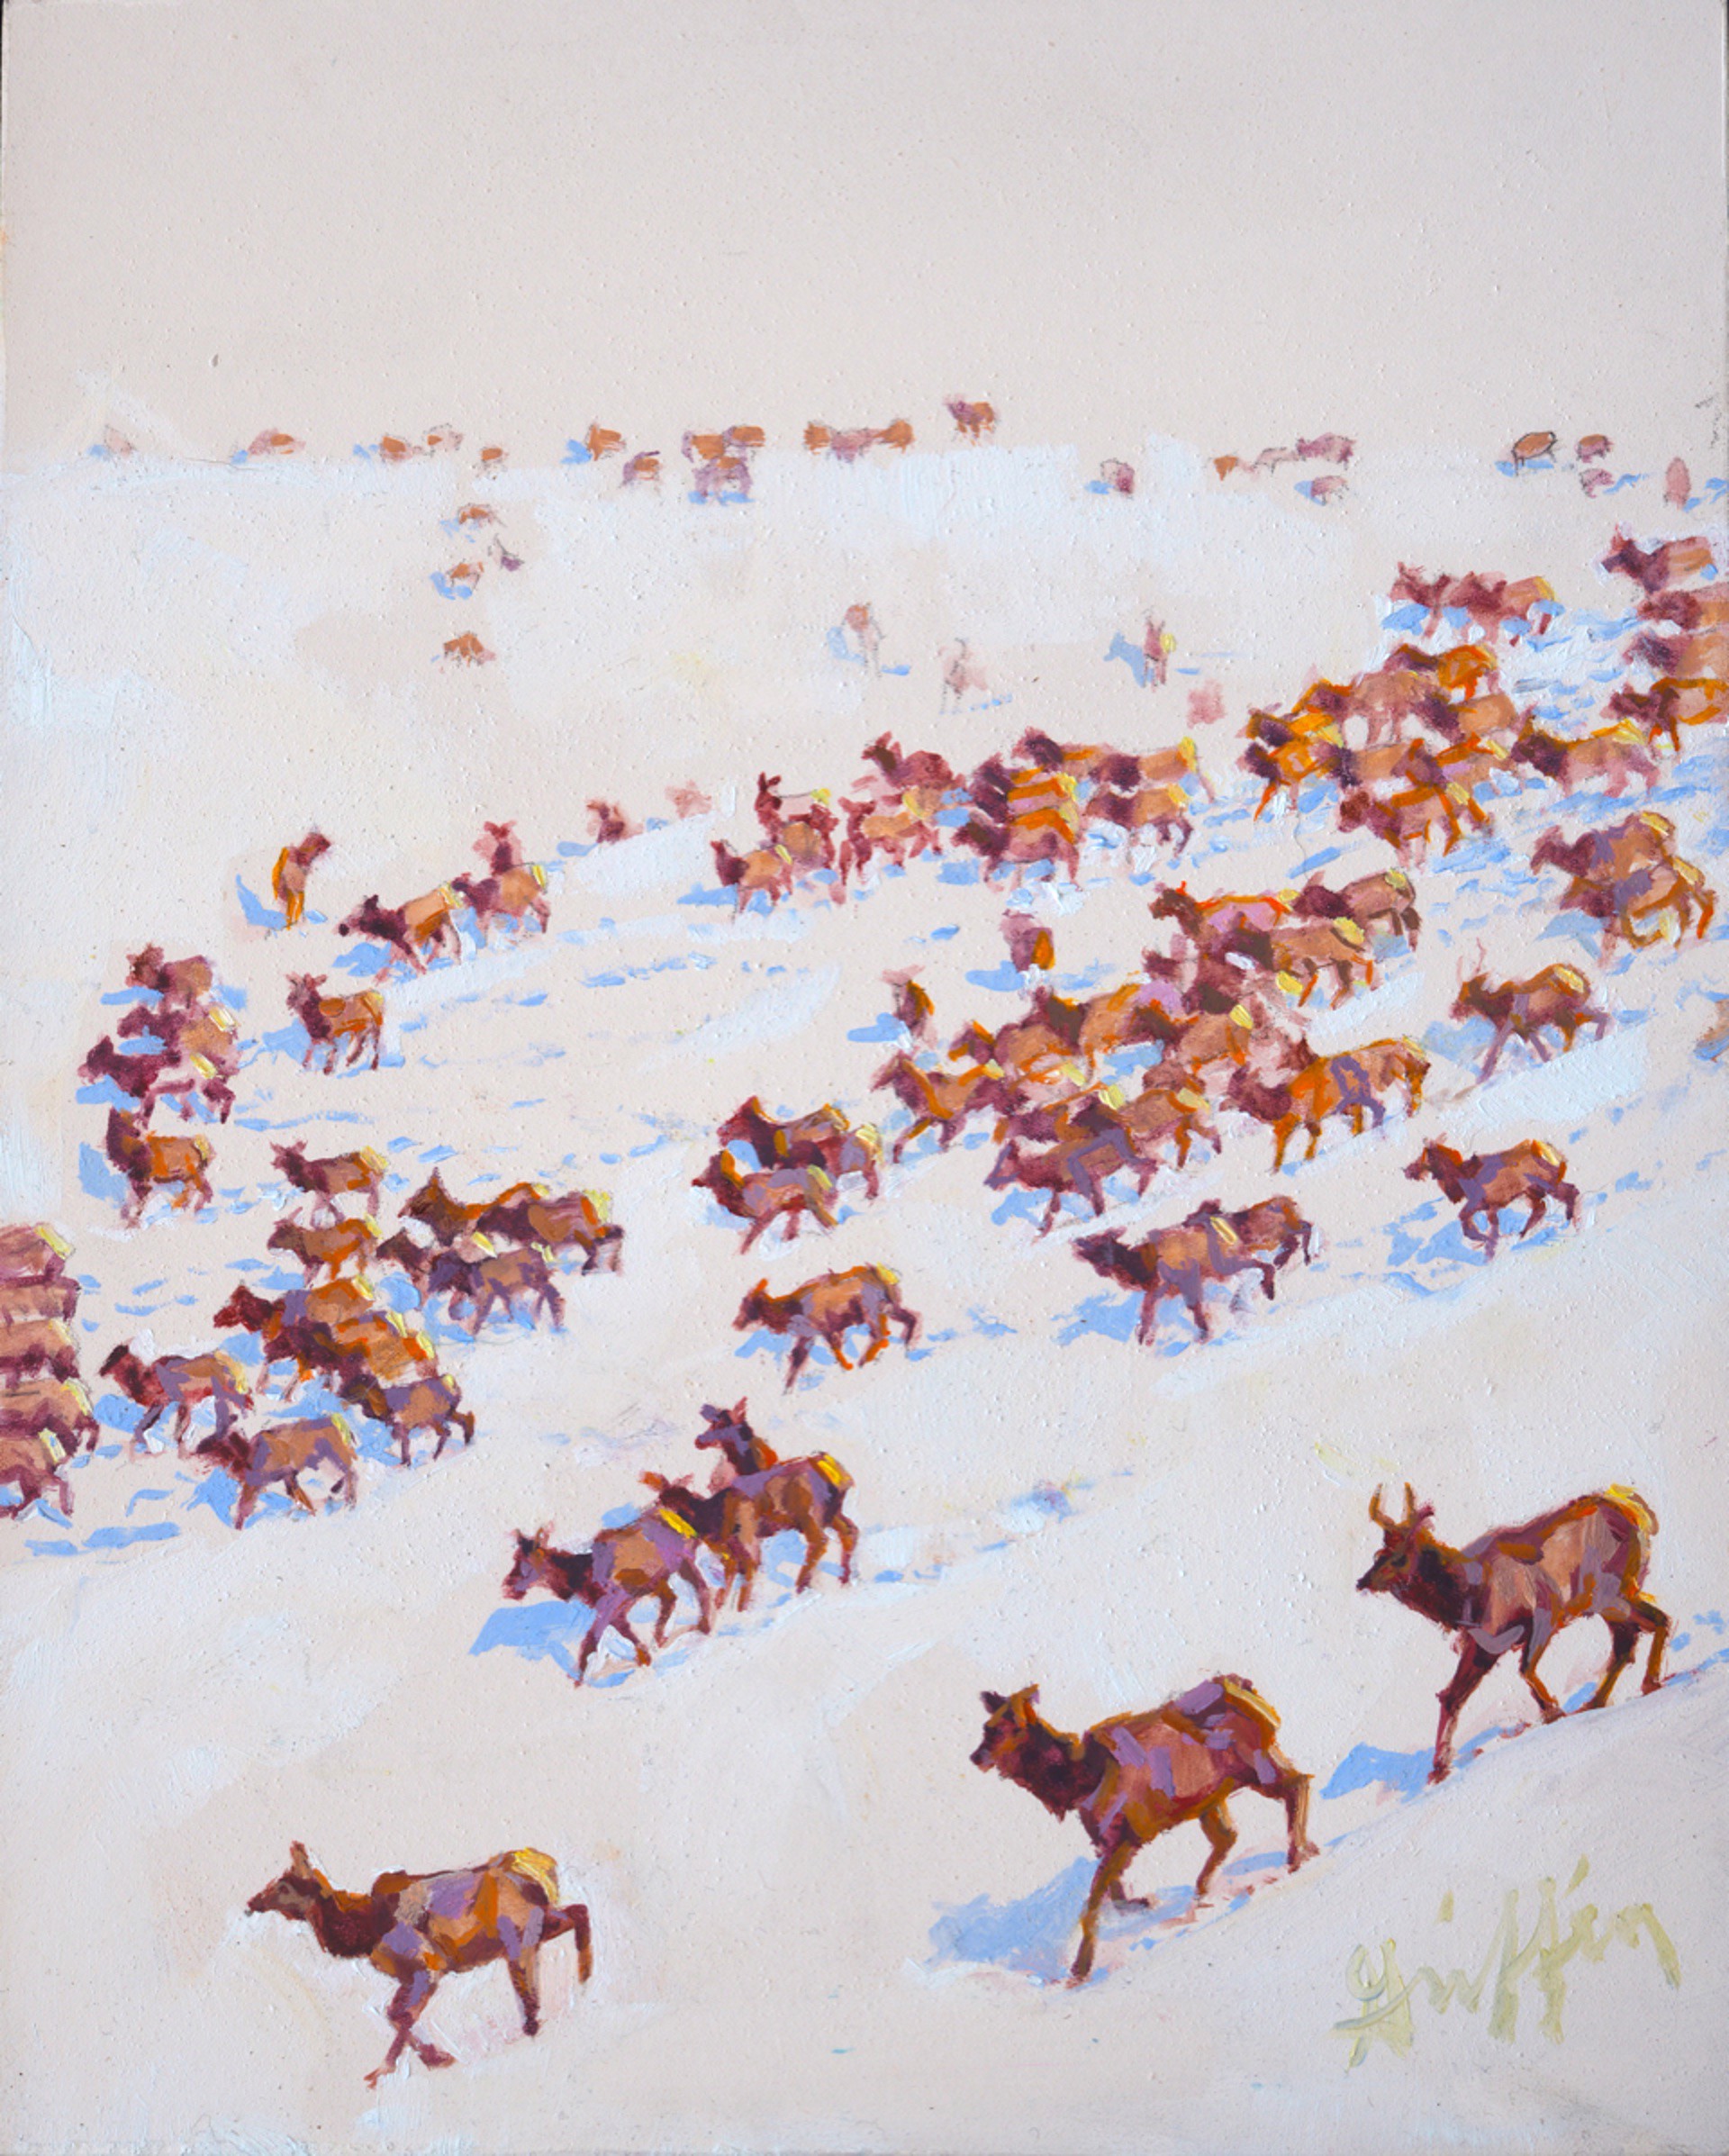 Original Oil Painting Featuring A Herd Of Elk From A Distance Migrating Through Snowy Landscape